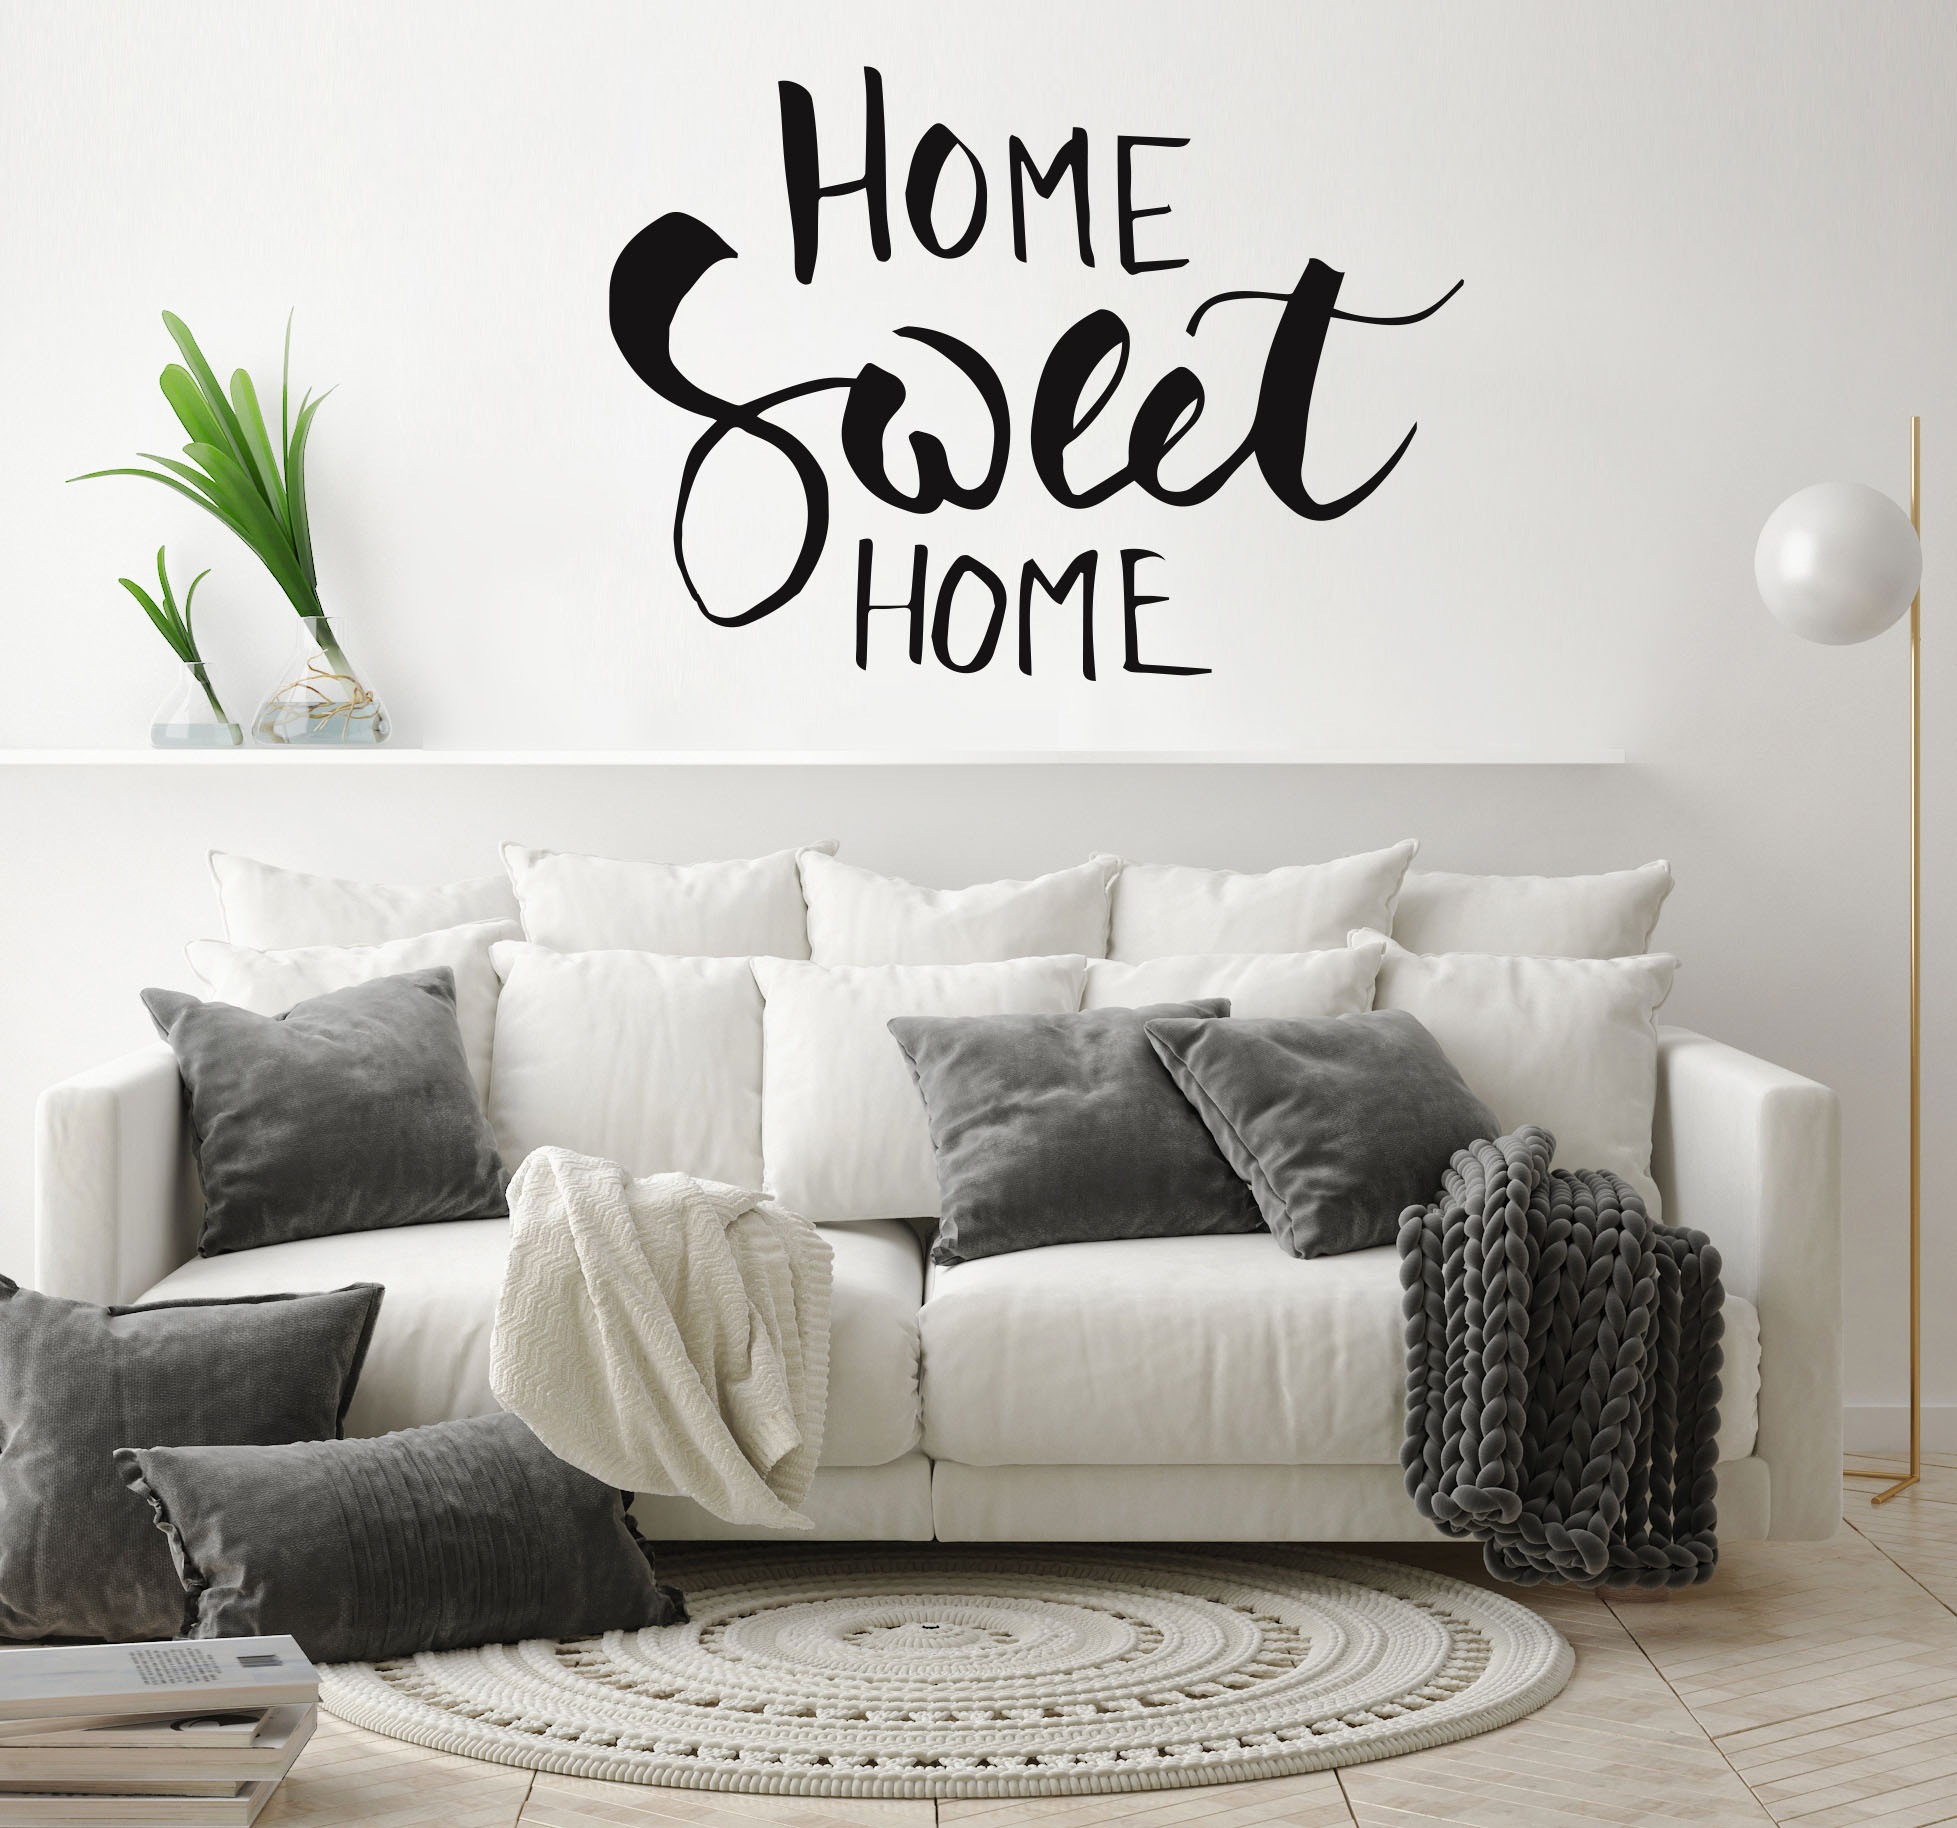 queence Wandtattoo »HOME SWEET HOME«, kaufen bequem (1 St.)